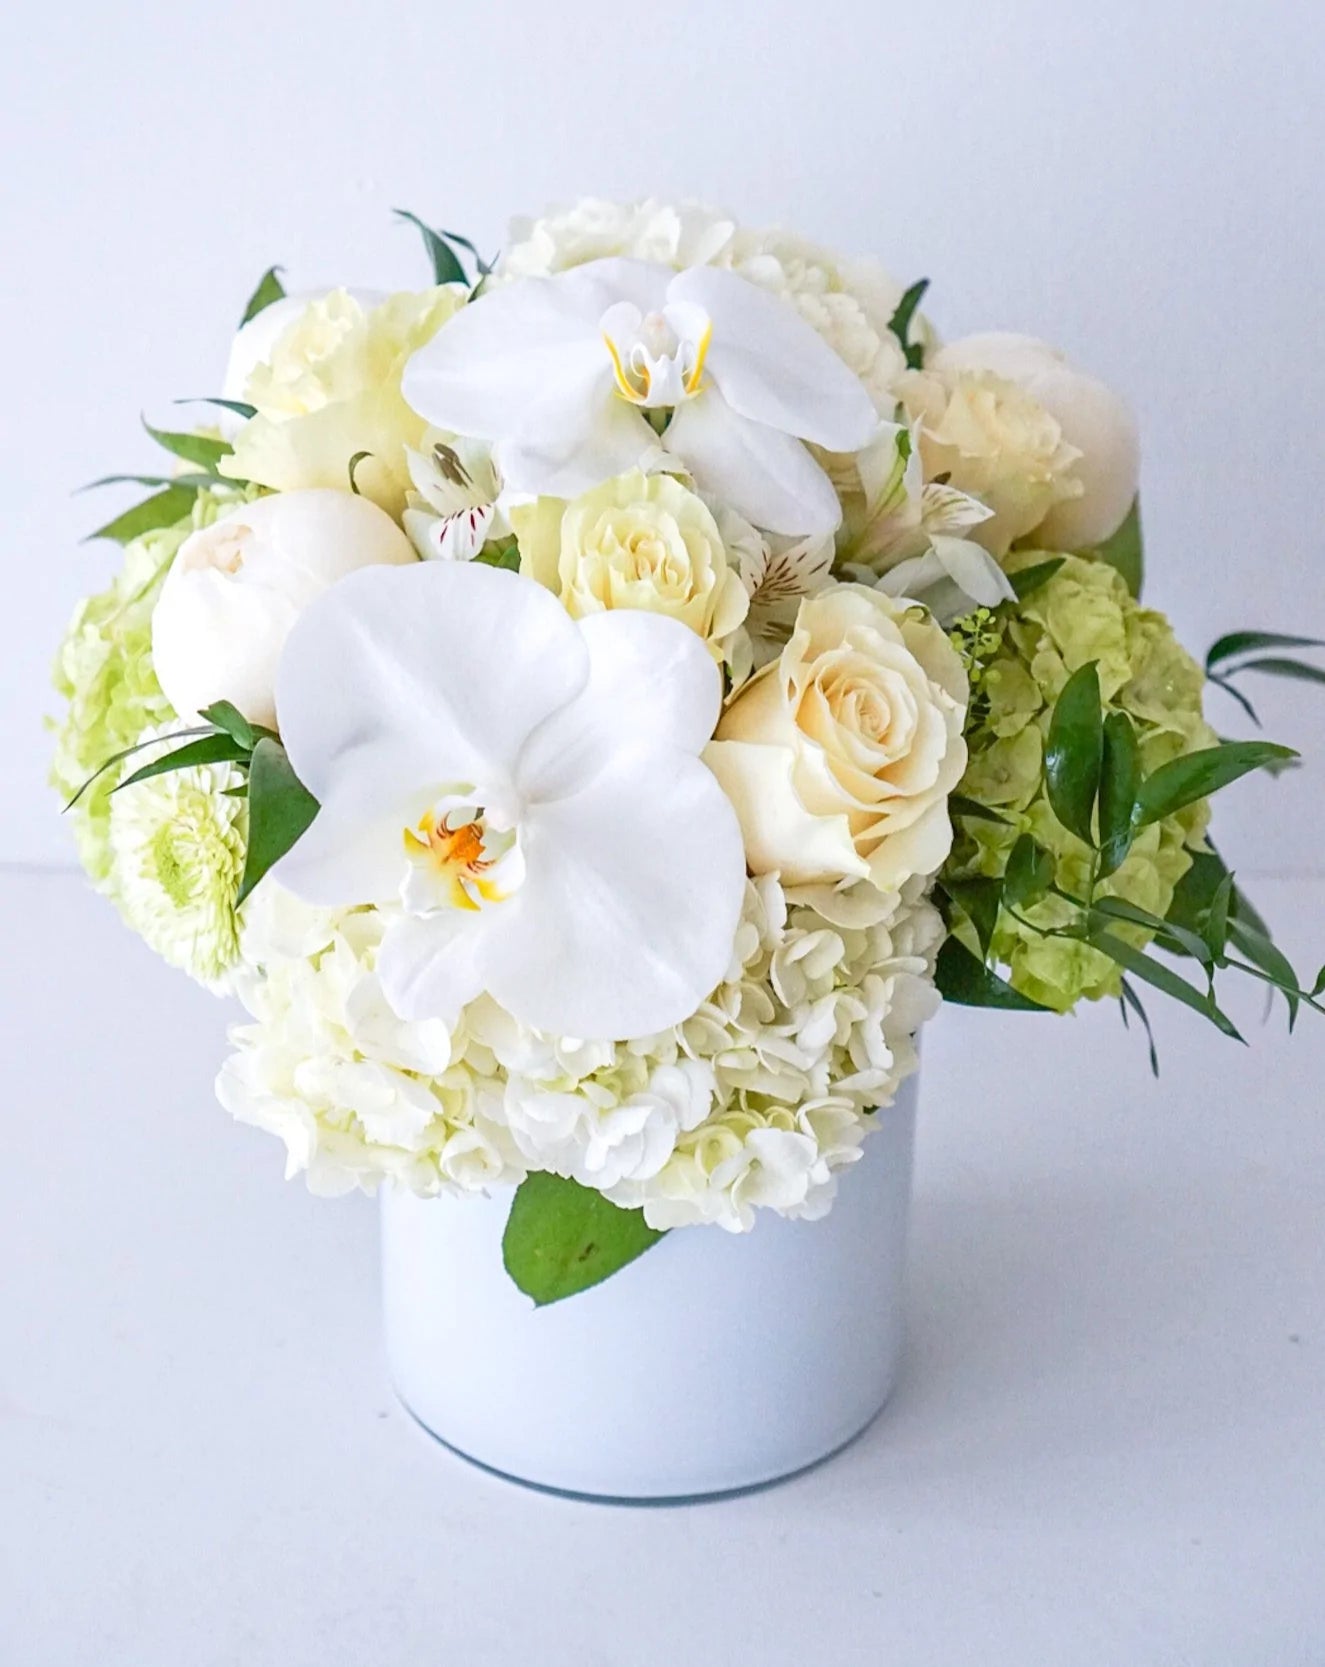 A combination of all premium blooms - Hydrangeas, Roses, with touch of Mini roses and Phalaenopsis orchid blooms, designed in a 5" x 5" cylinder glass vase